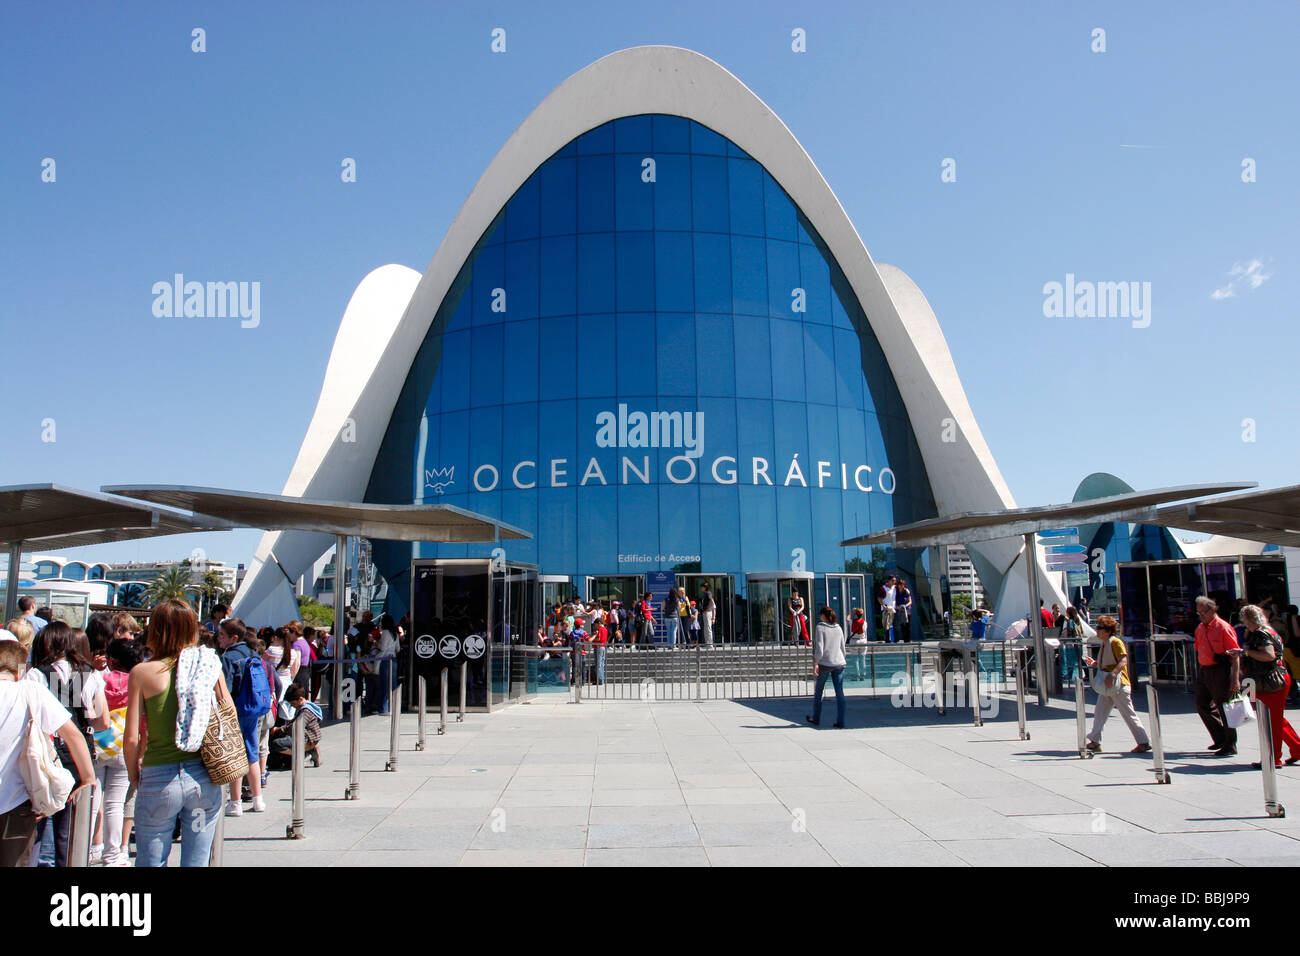 Queues of people waiting to enter the famous Oceanografico in the new City of Arts & Science ,Valencia,Spain, Stock Photo